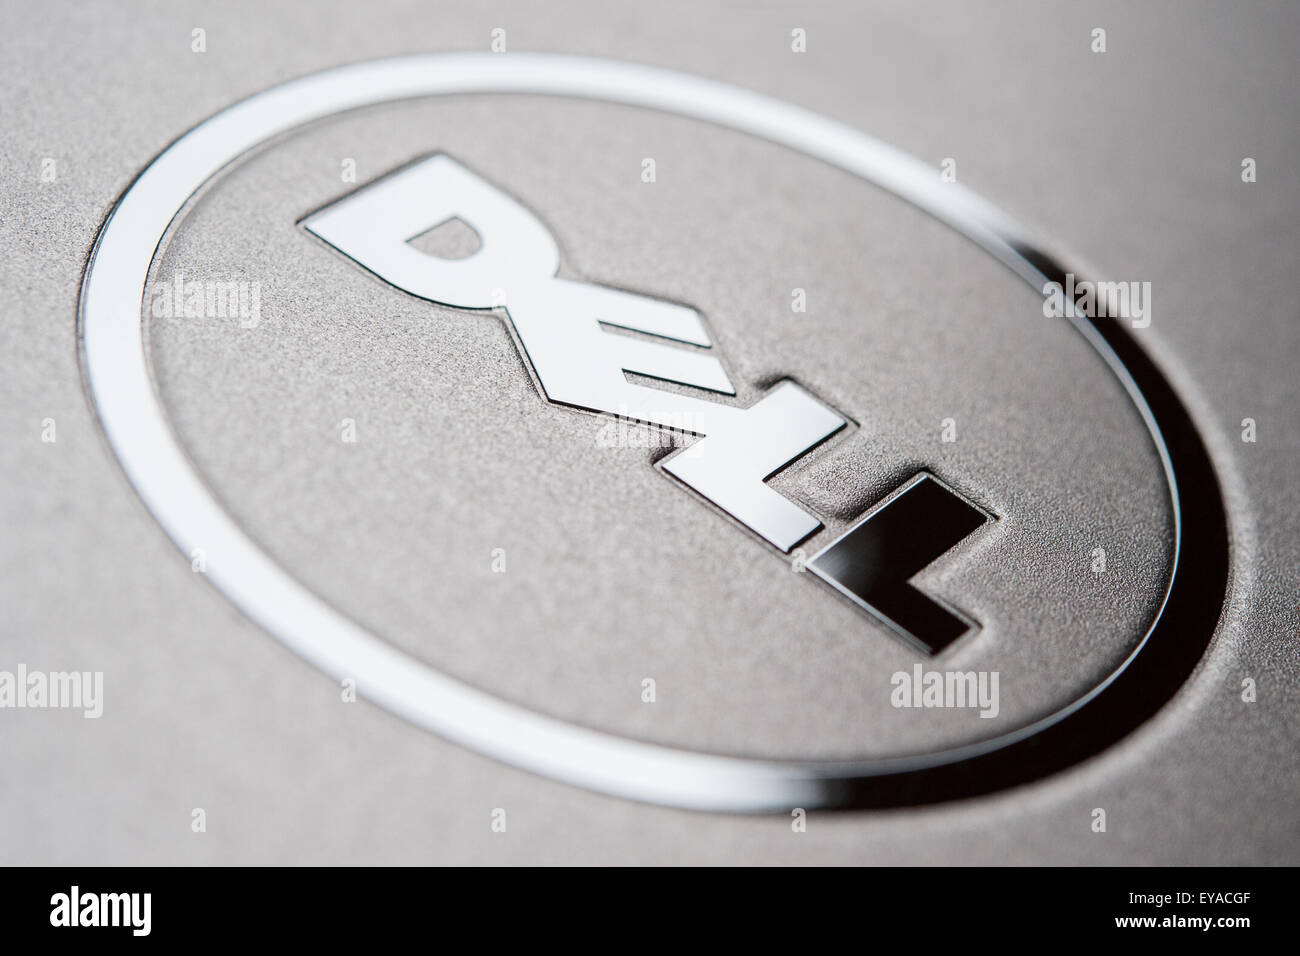 Hannover, Germany, the computer manufacturer Dell Logo on a laptop Stock Photo